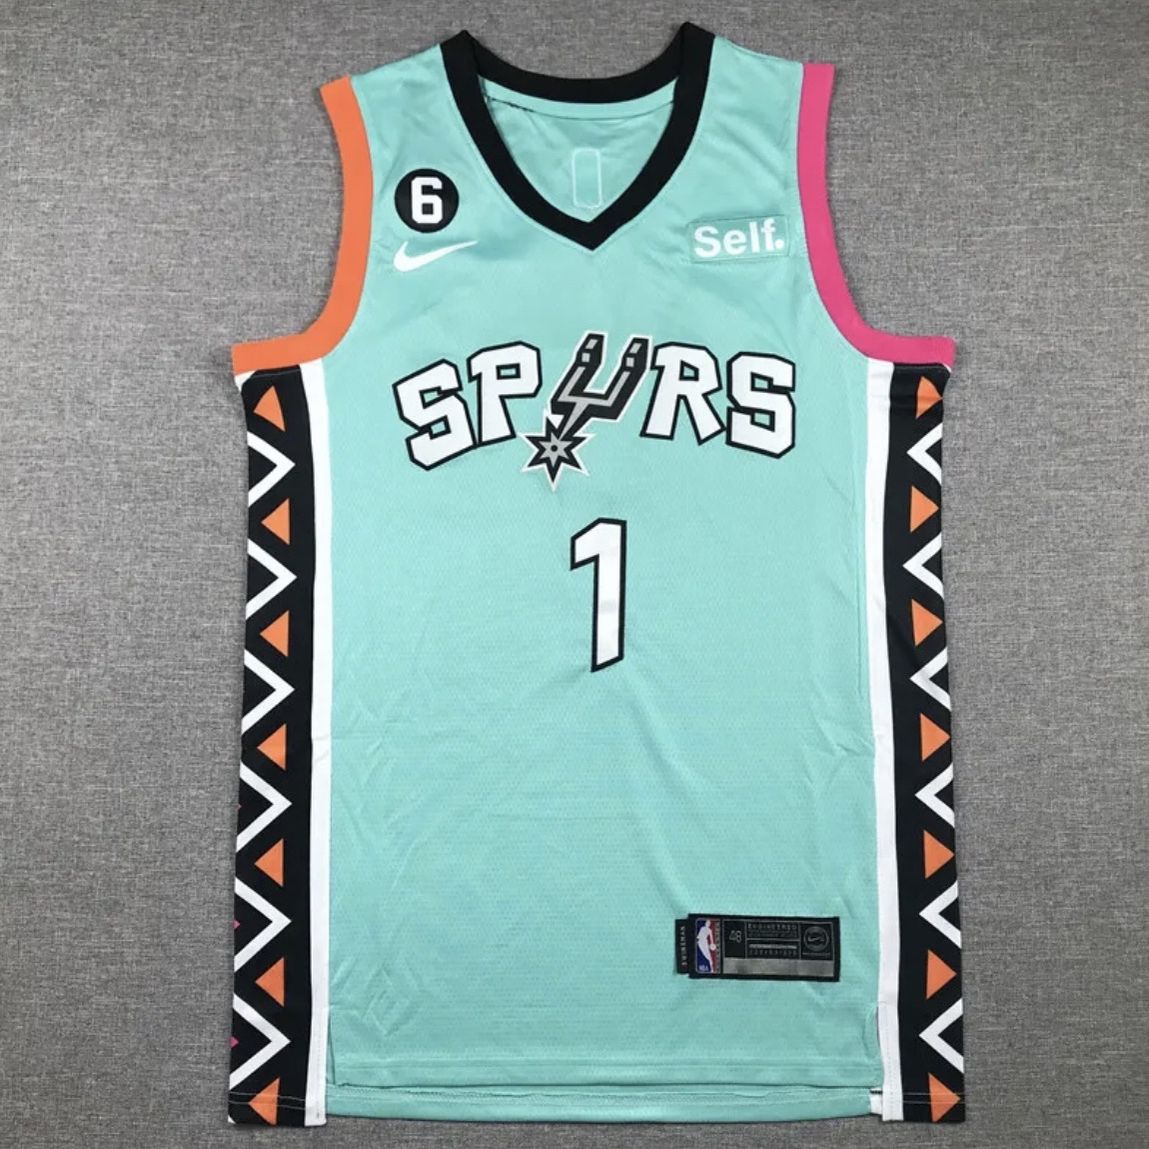 San Antonio Spurs NBA Finals game worn jersey for Sale in Los Angeles, CA -  OfferUp